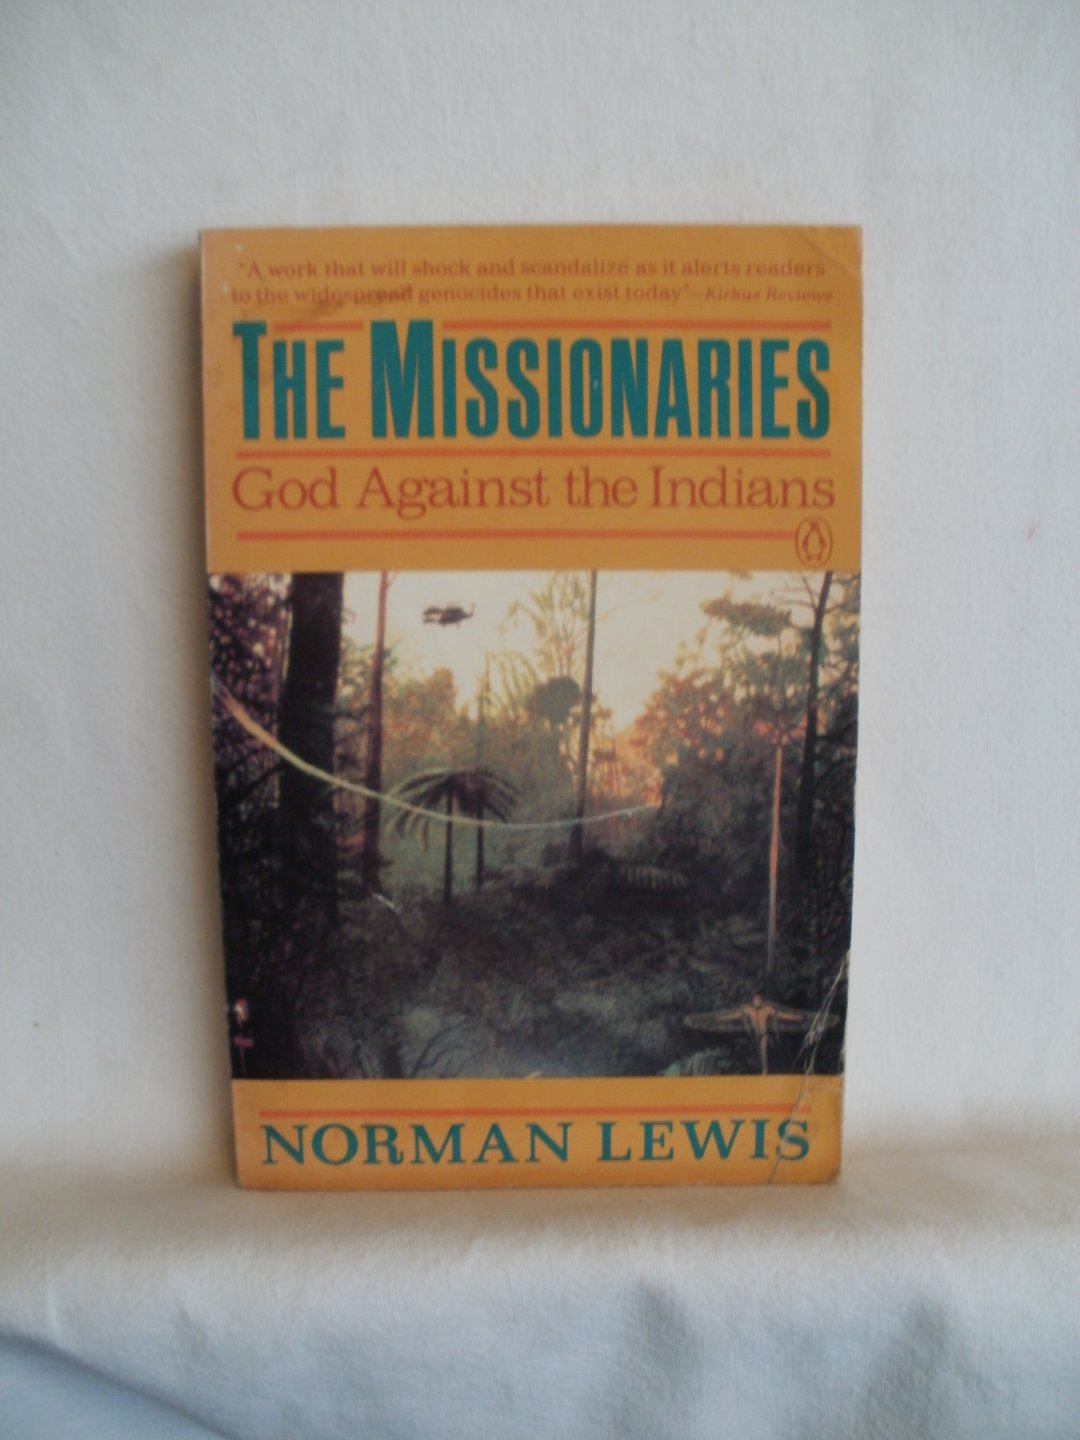 Lewis, Norman - The Missionaries. God Against the Indians